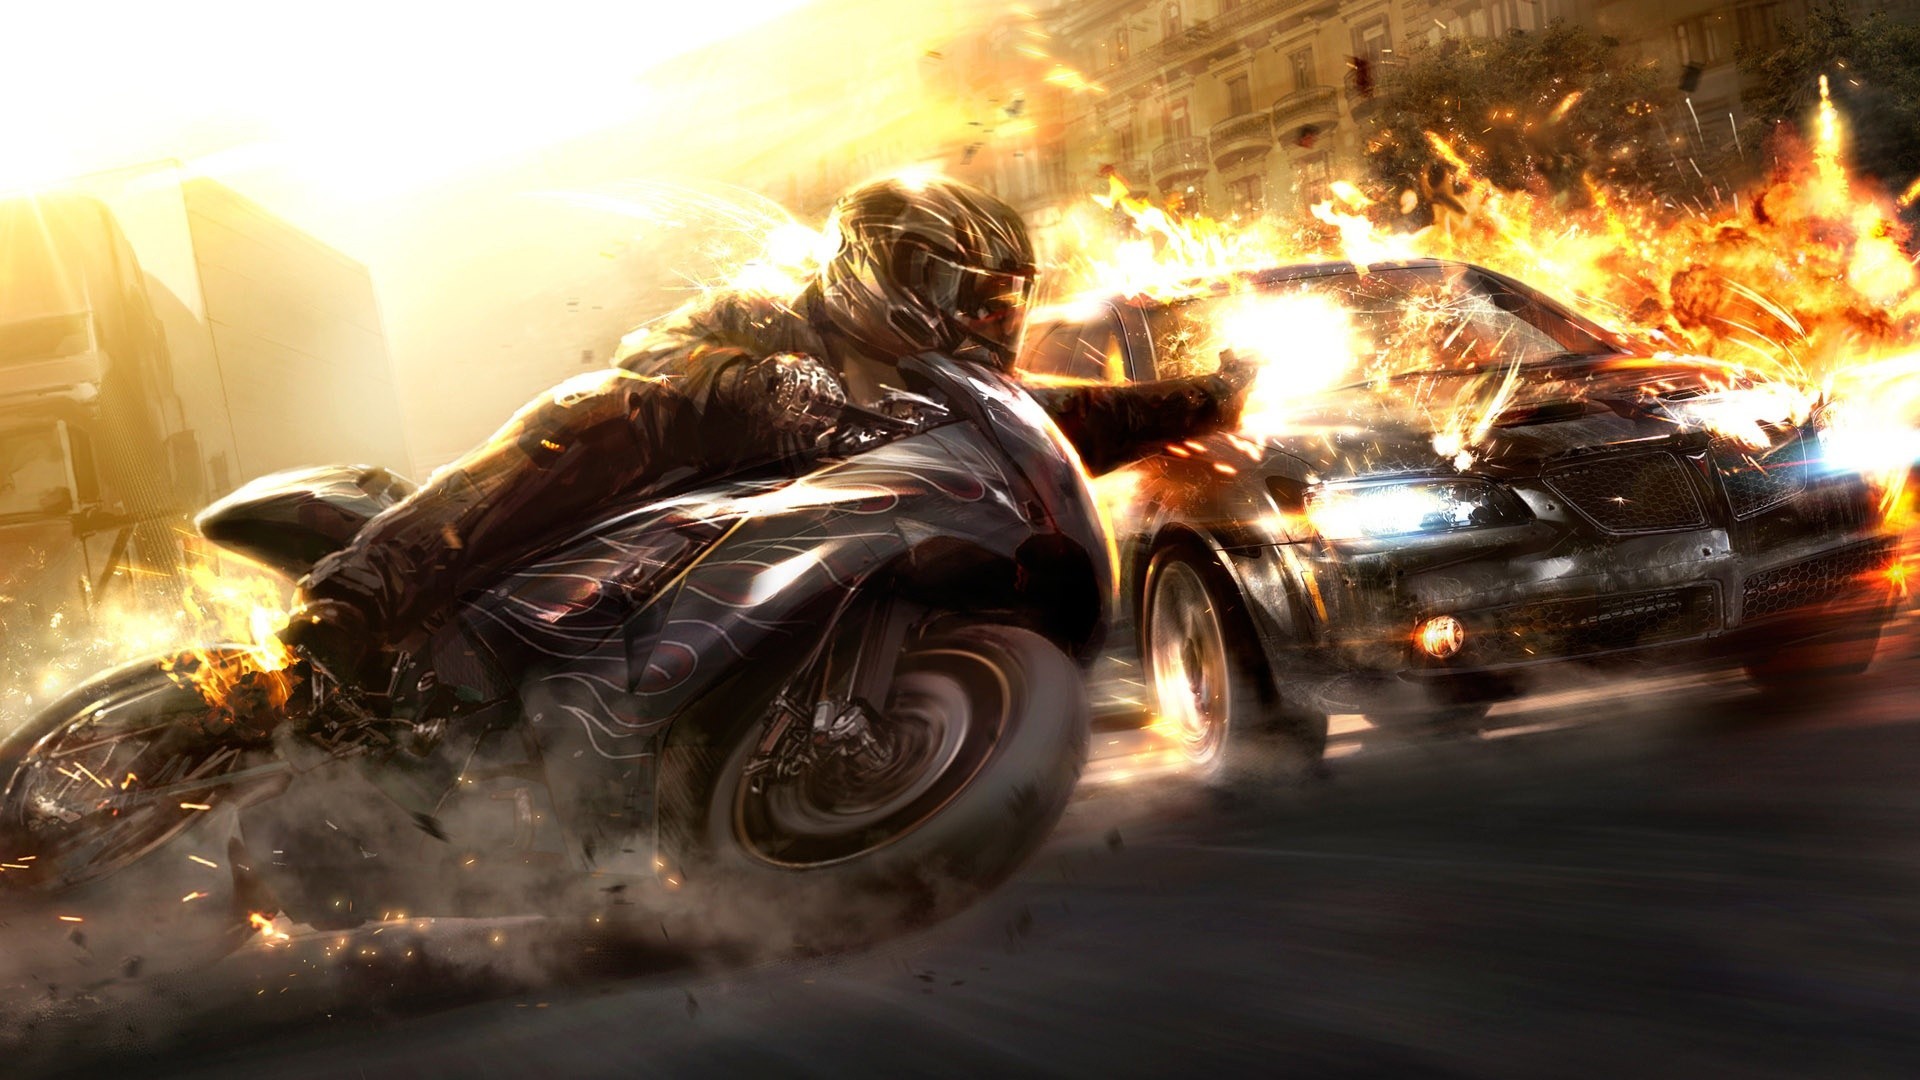 1920x1080 Awesome Motorcycle Wallpaper